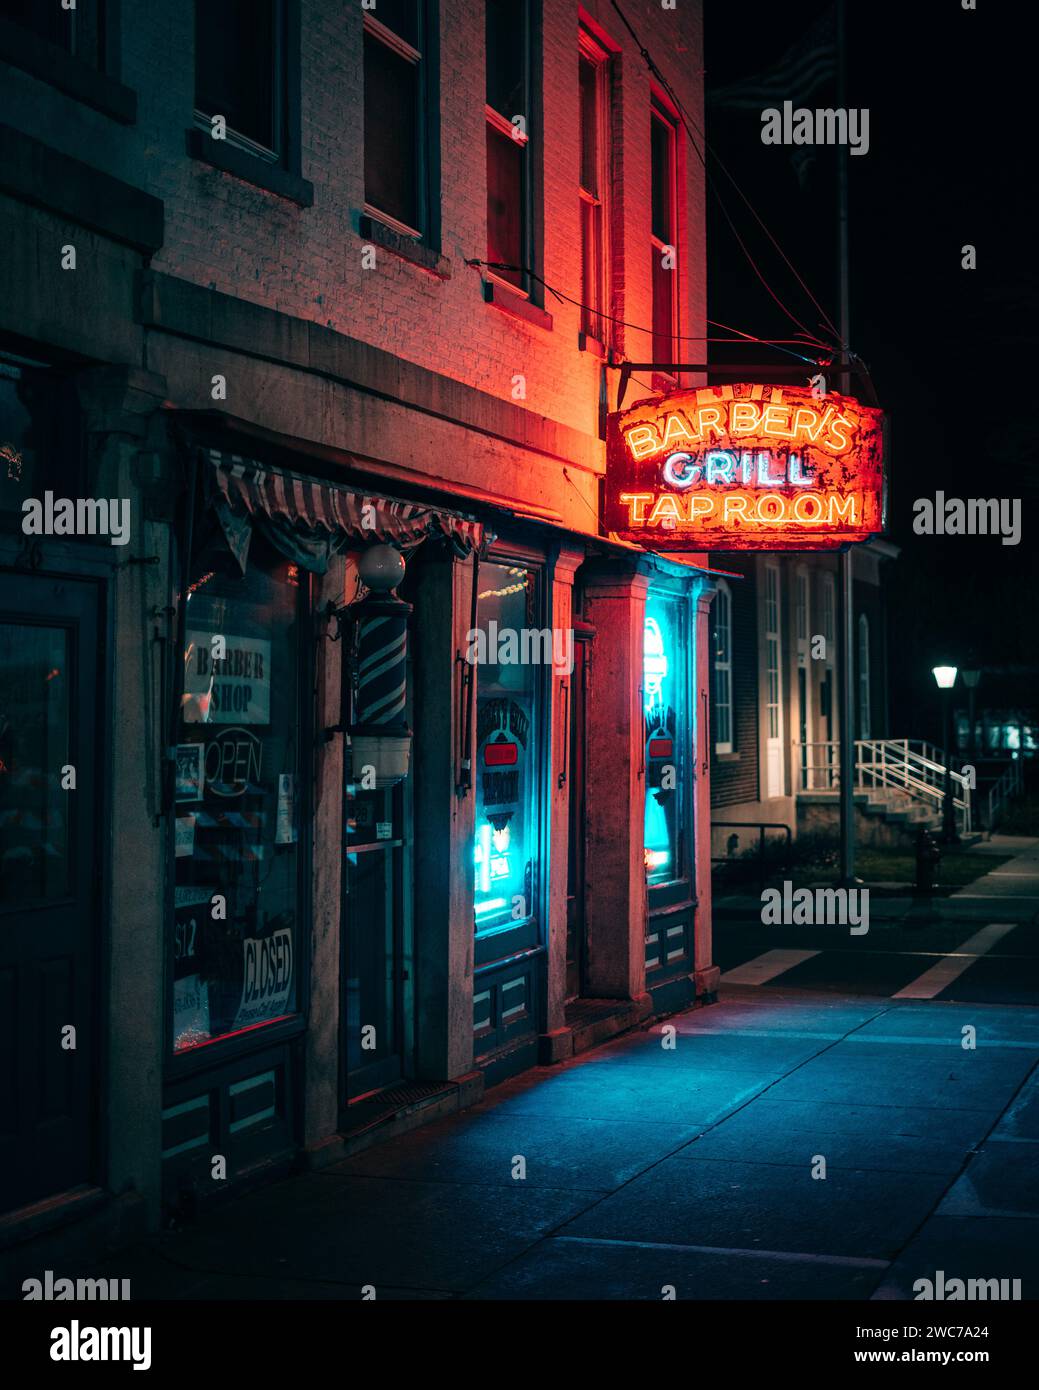 Barbers Grill & Tap Room vintage neon sign at night, Brockport, New York Stock Photo